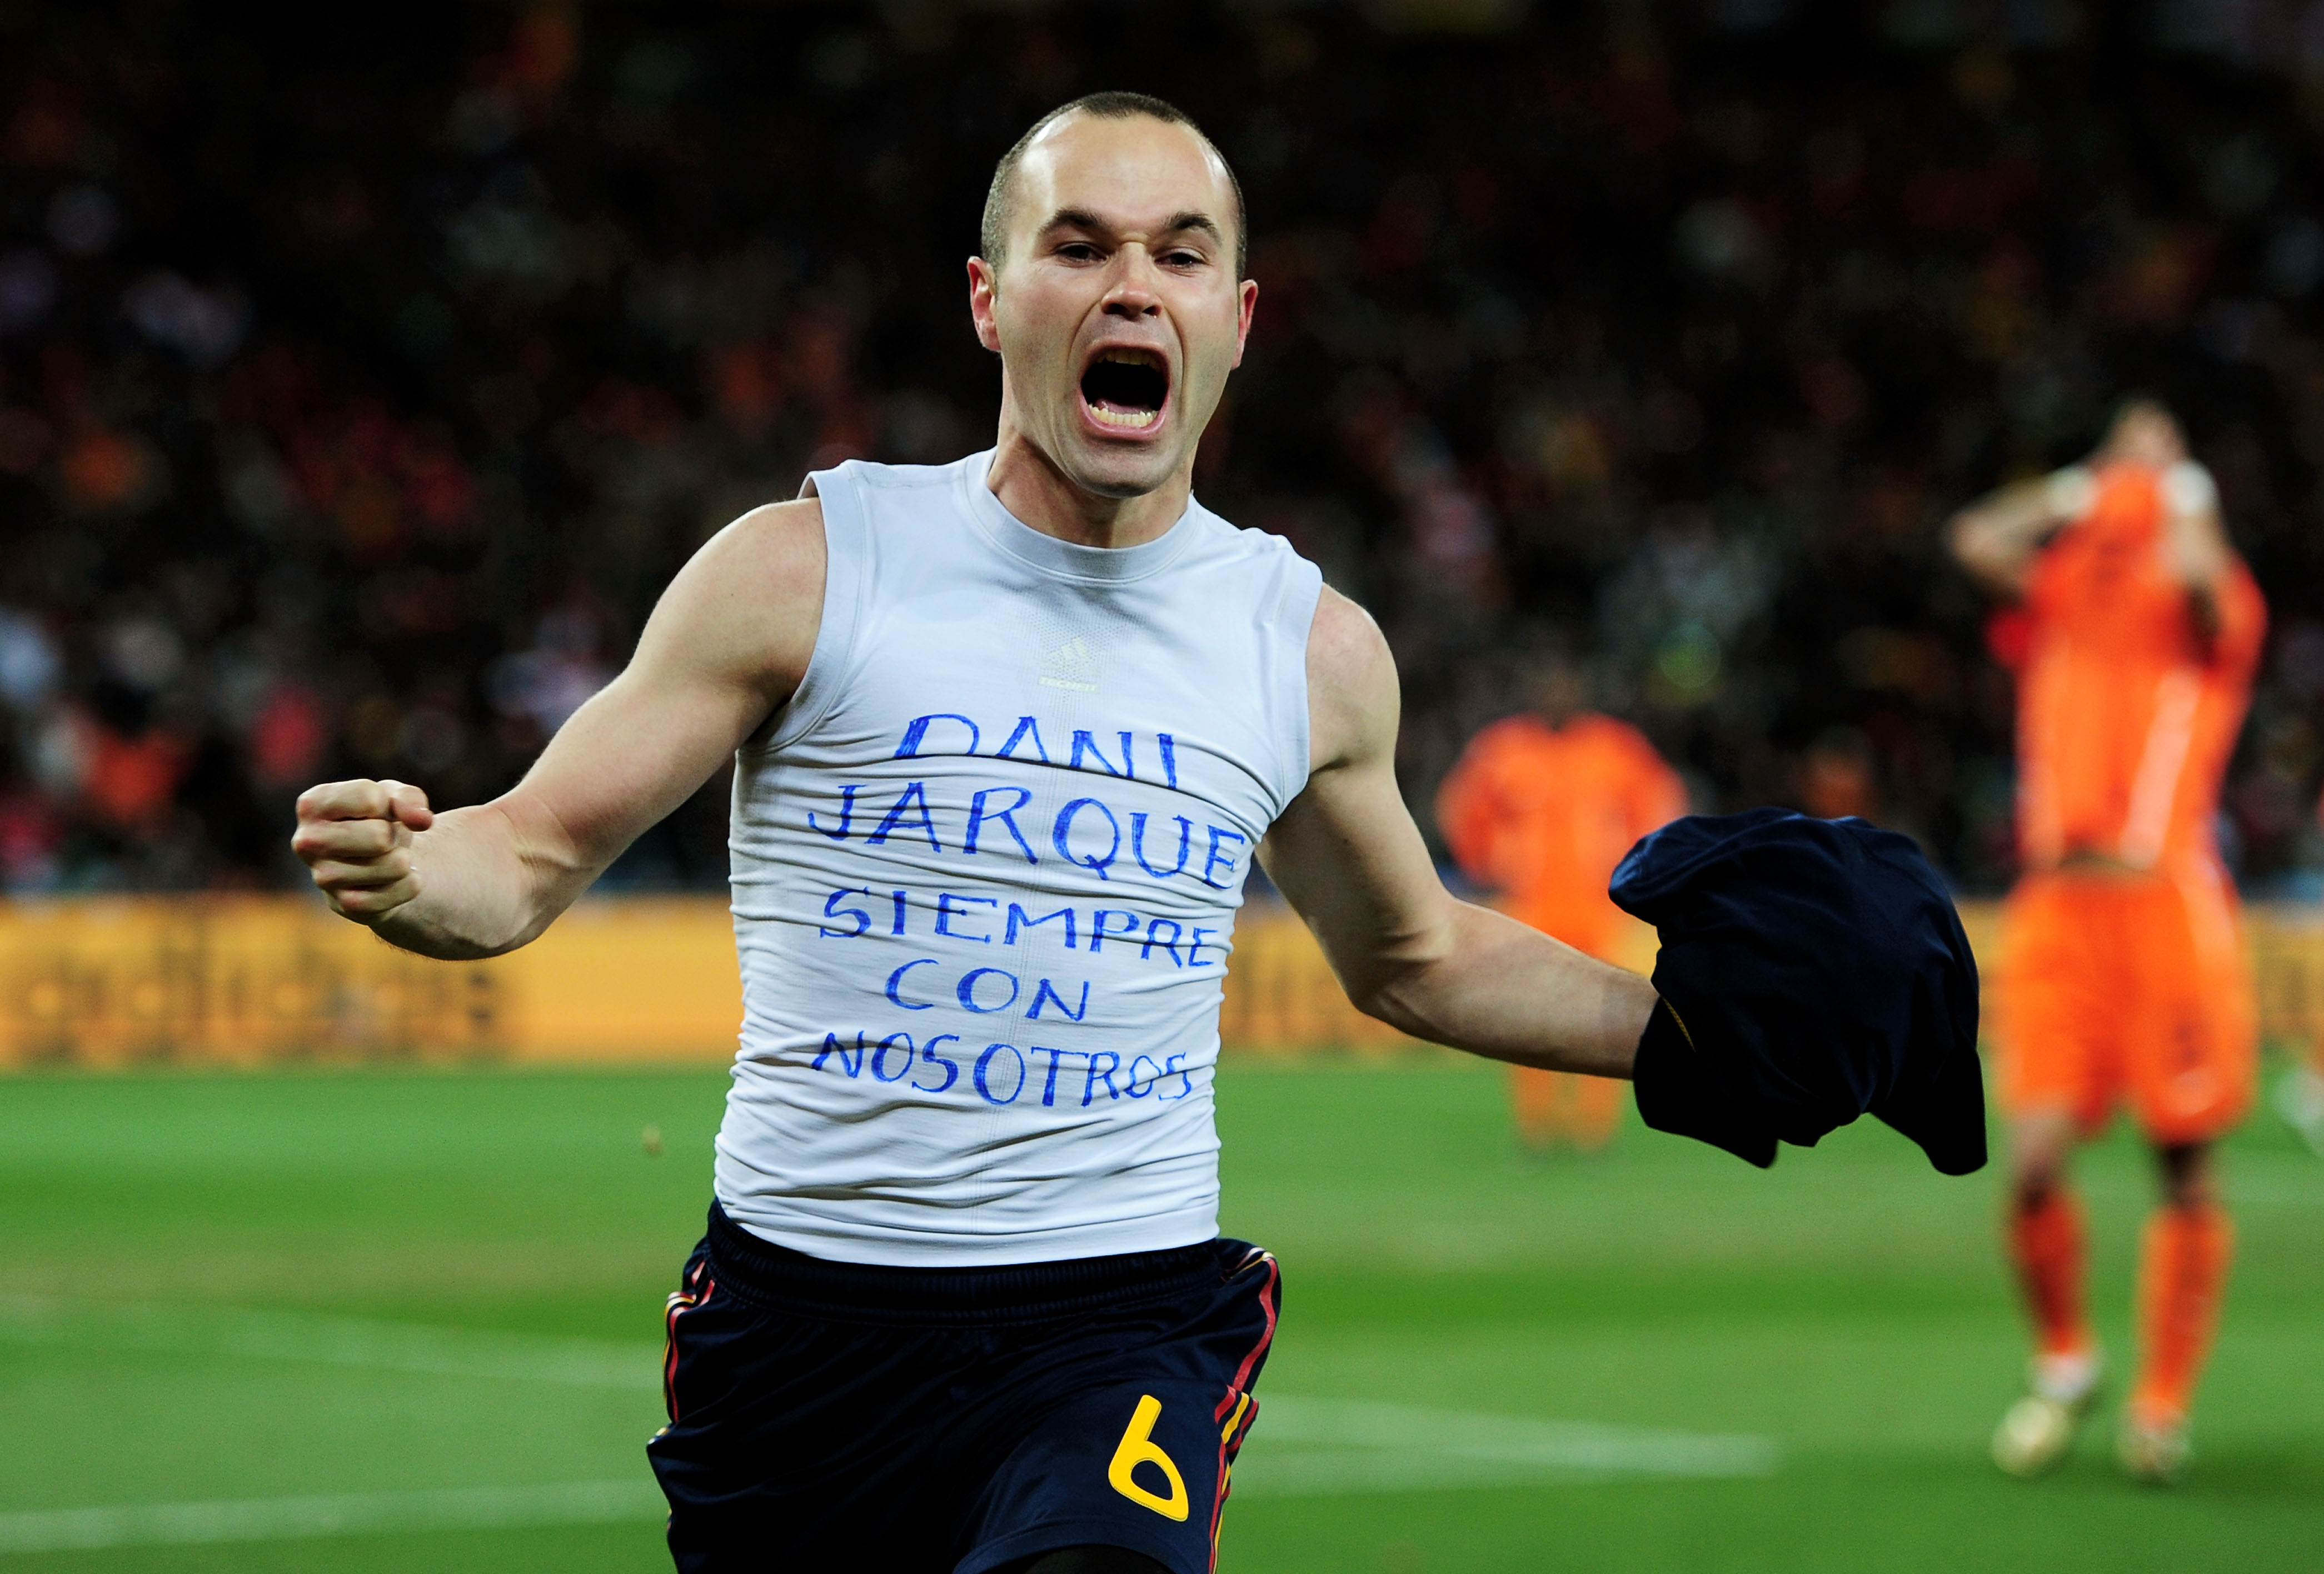 JOHANNESBURG, SOUTH AFRICA - JULY 11:  Andres Iniesta of Spain celebrates scoring his side's first goal during the 2010 FIFA World Cup South Africa Final match between Netherlands and Spain at Soccer City Stadium on July 11, 2010 in Johannesburg, South Af